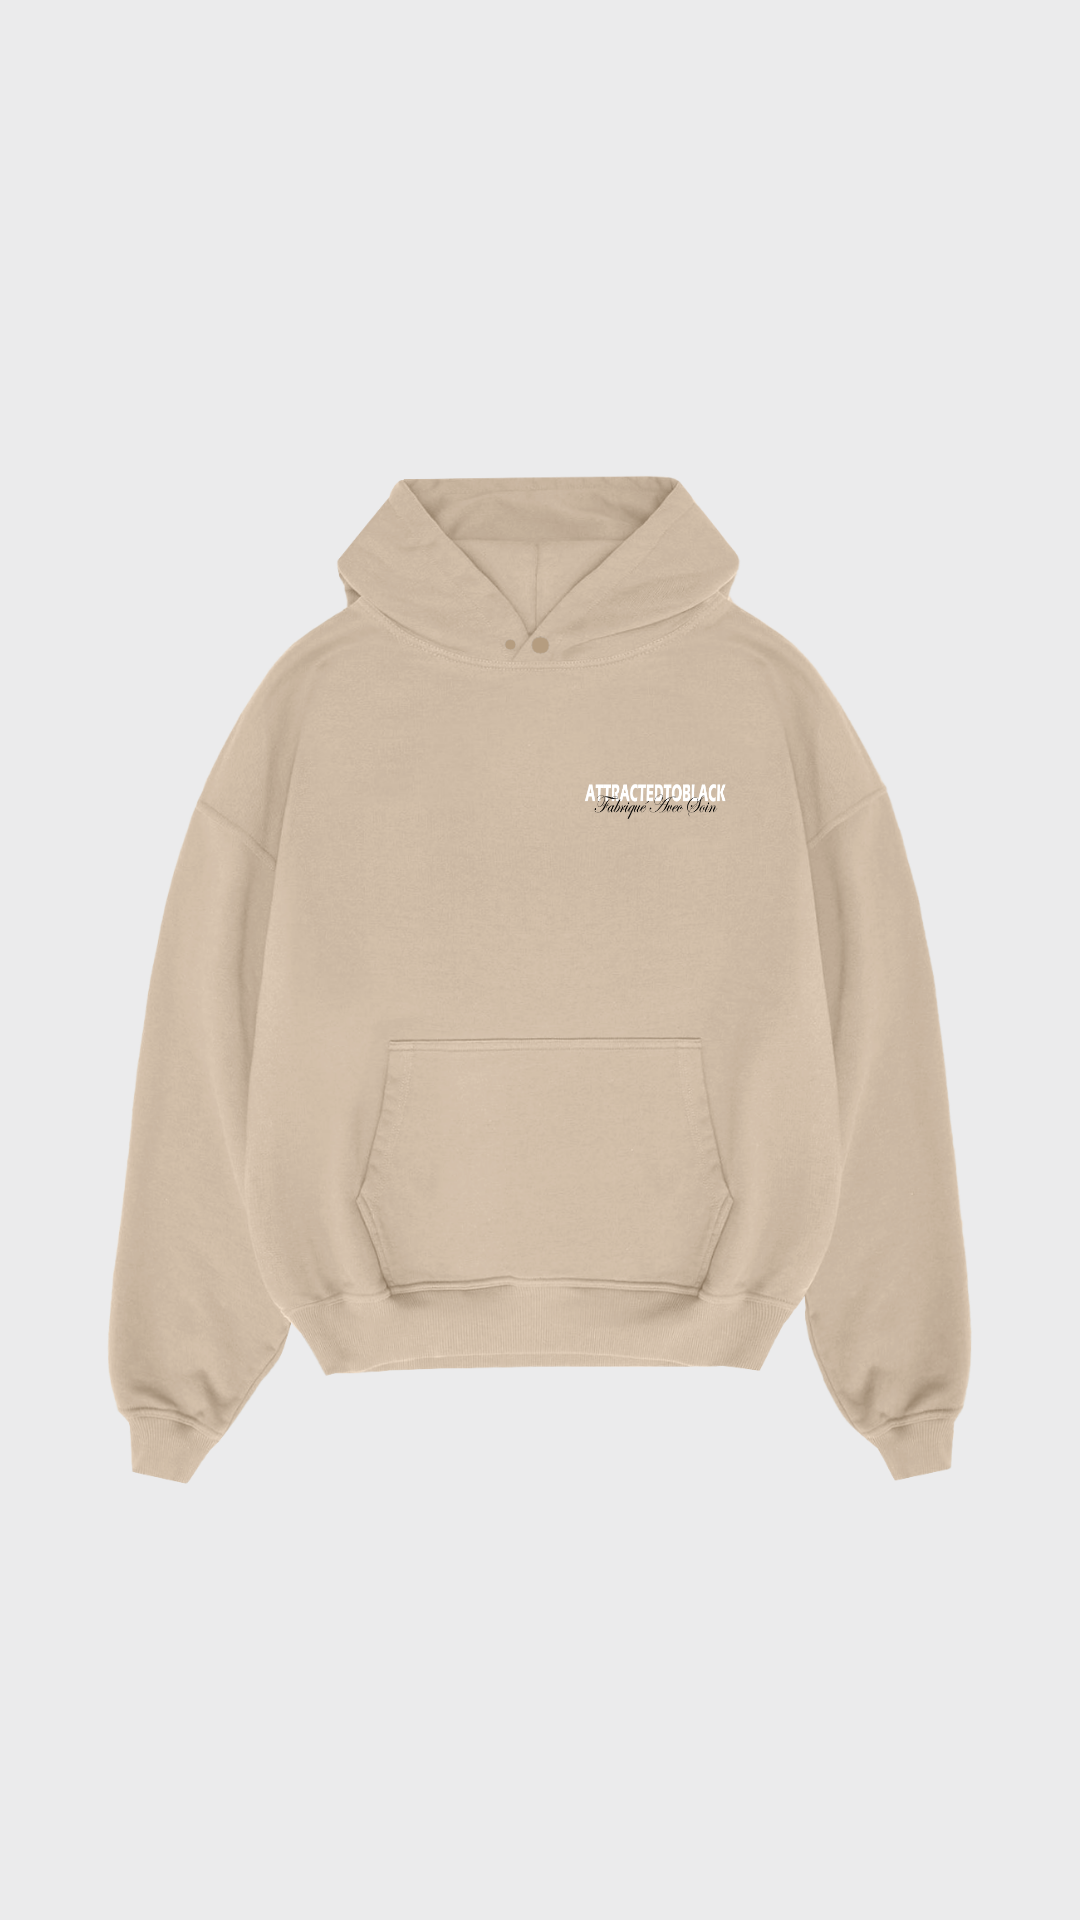 The Our Color Hoodie